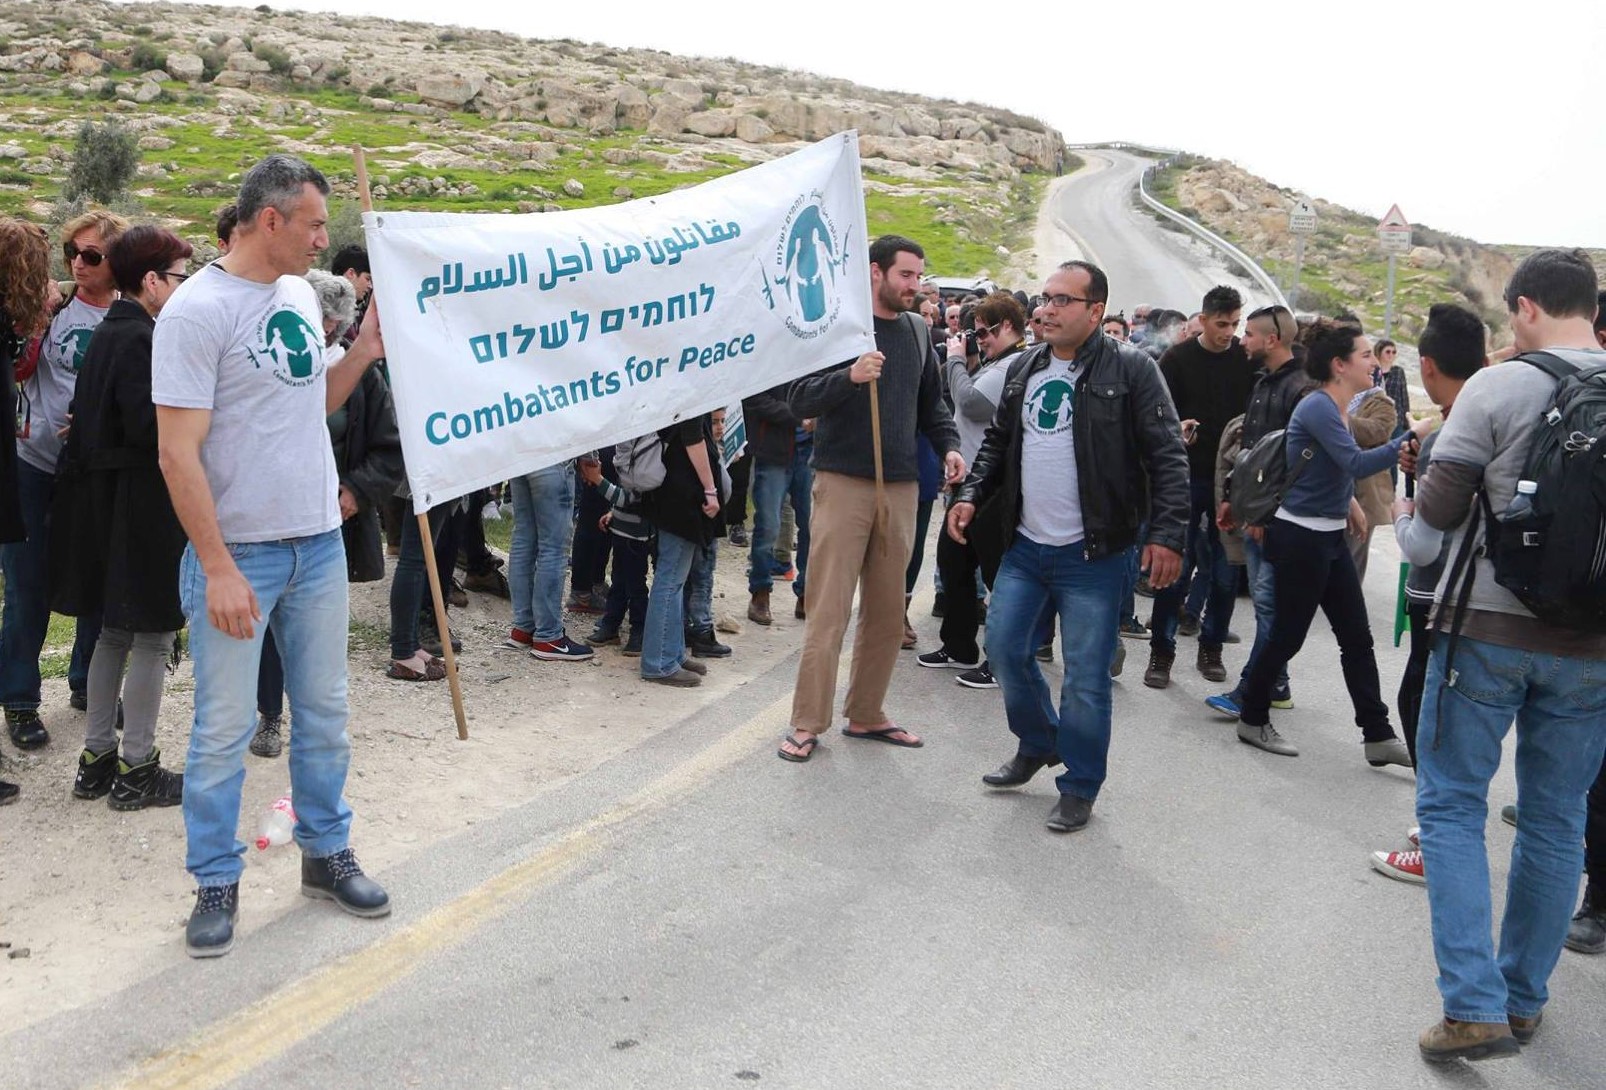 Palestinians and Israelis protest against the occupation in the West Bank, March 2018